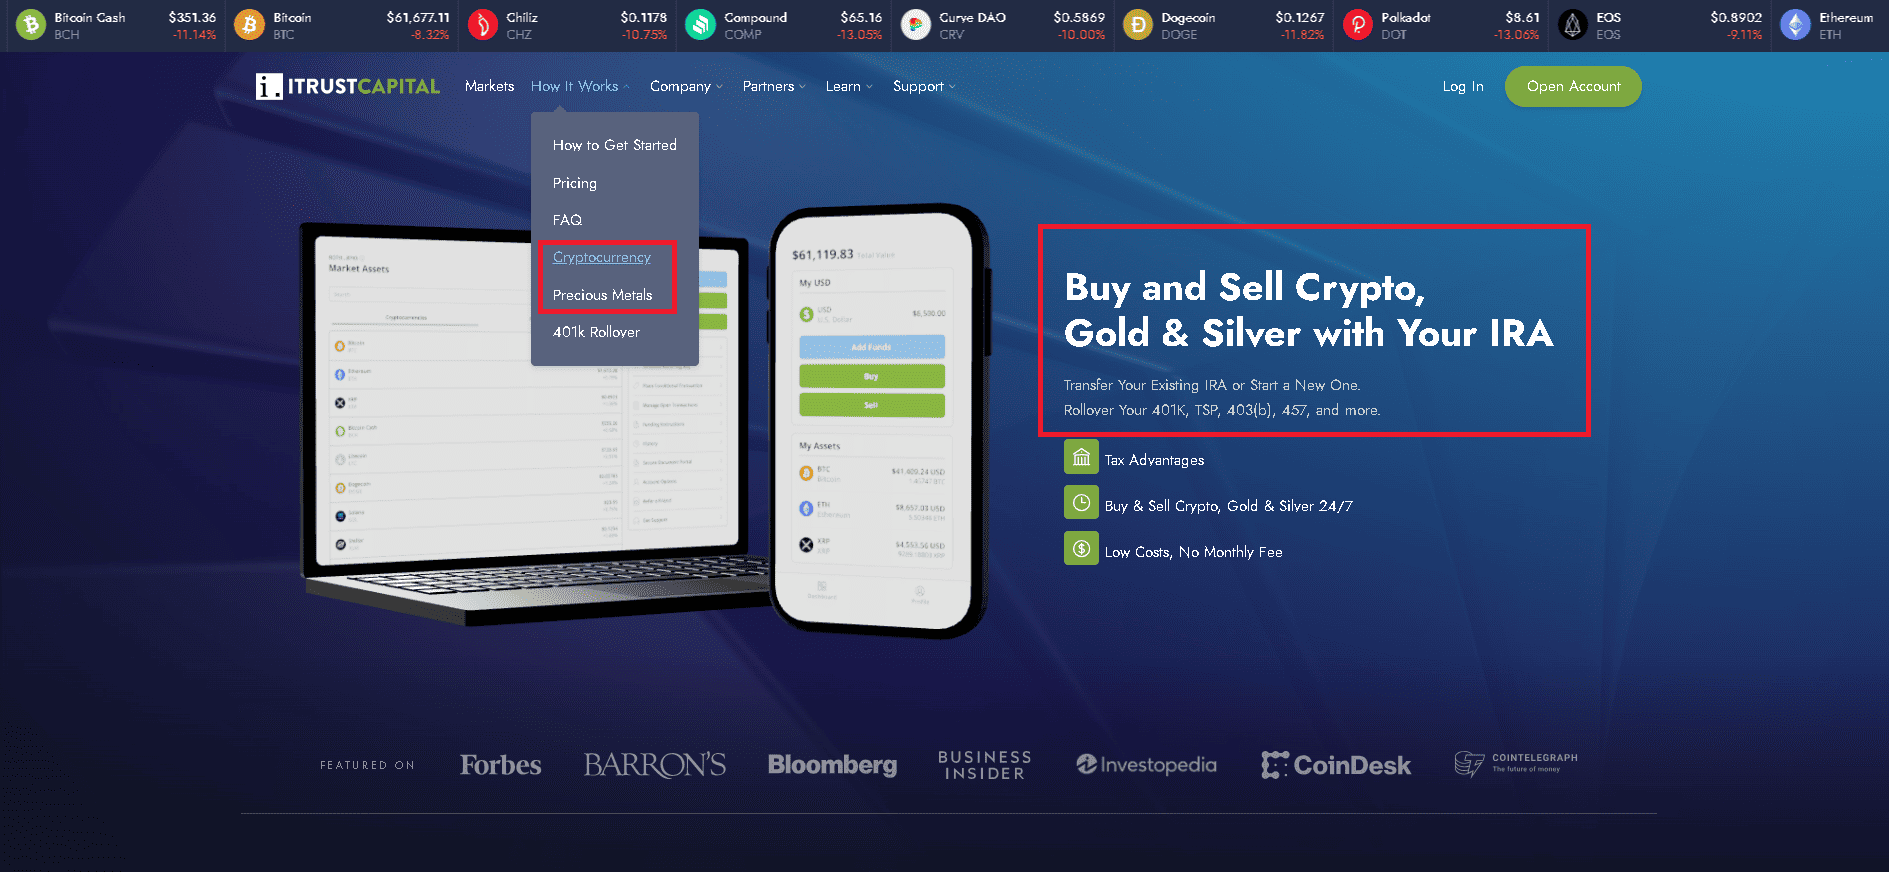 iTrustCapital sell gold, silver Bitcoin and cryptocurrencies